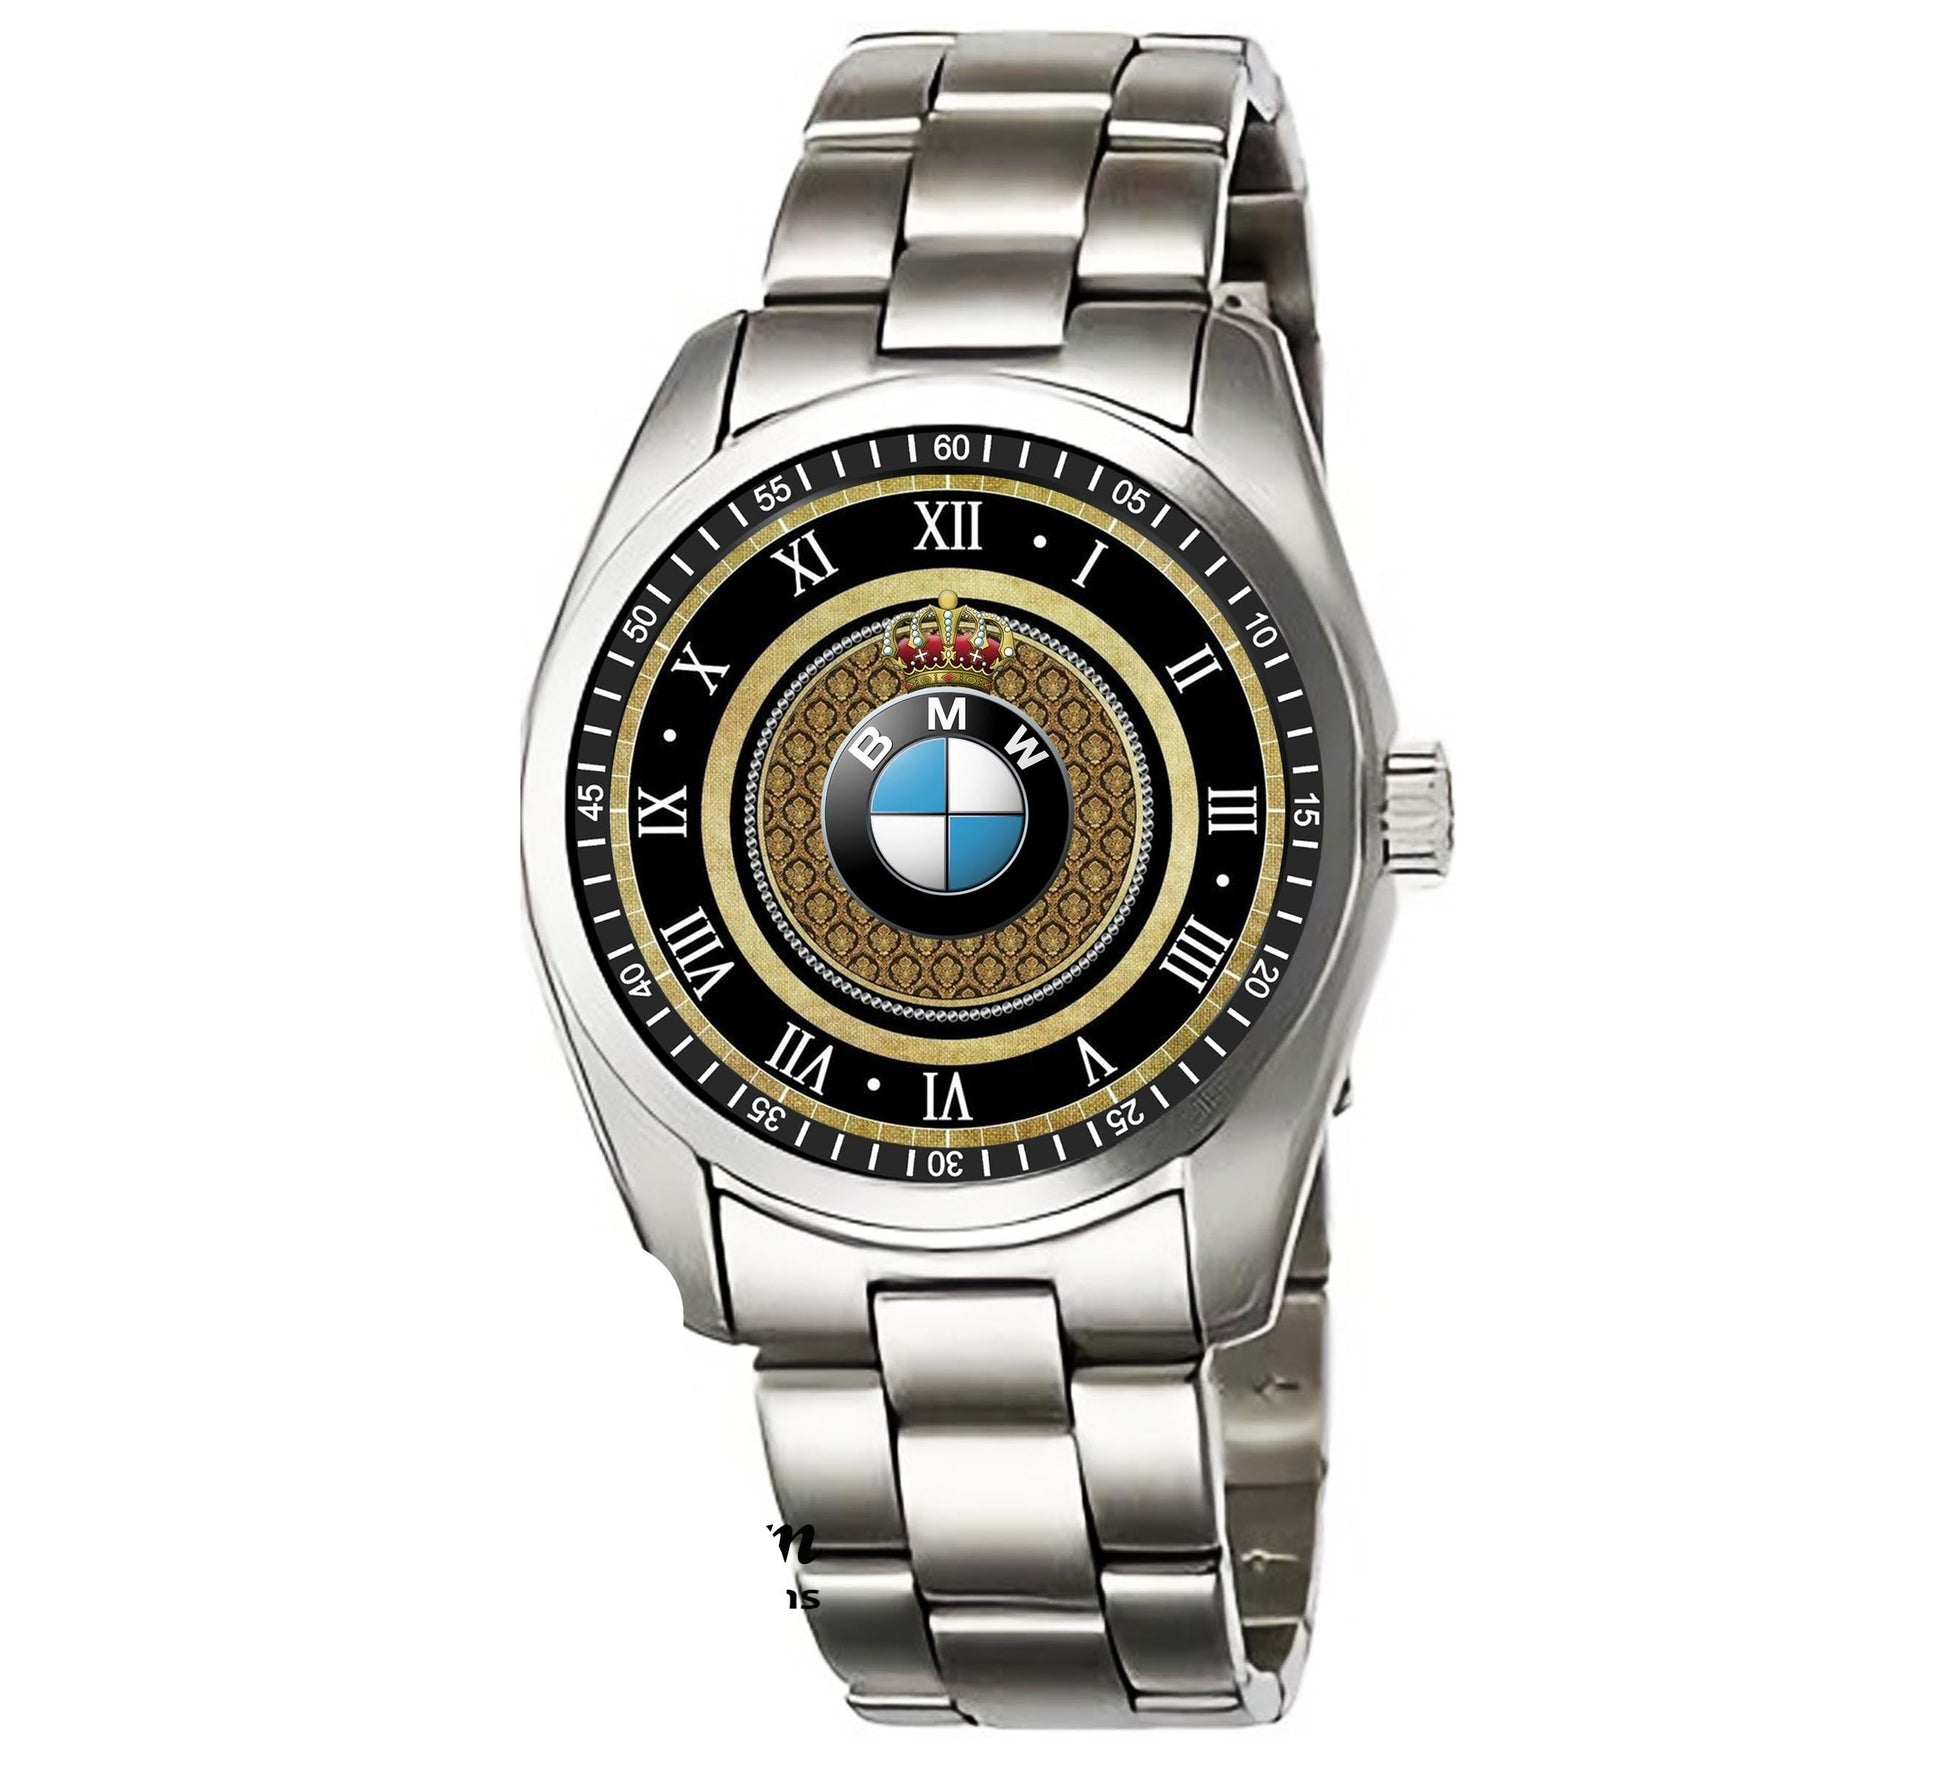 BMW King Classic Watches bdk9